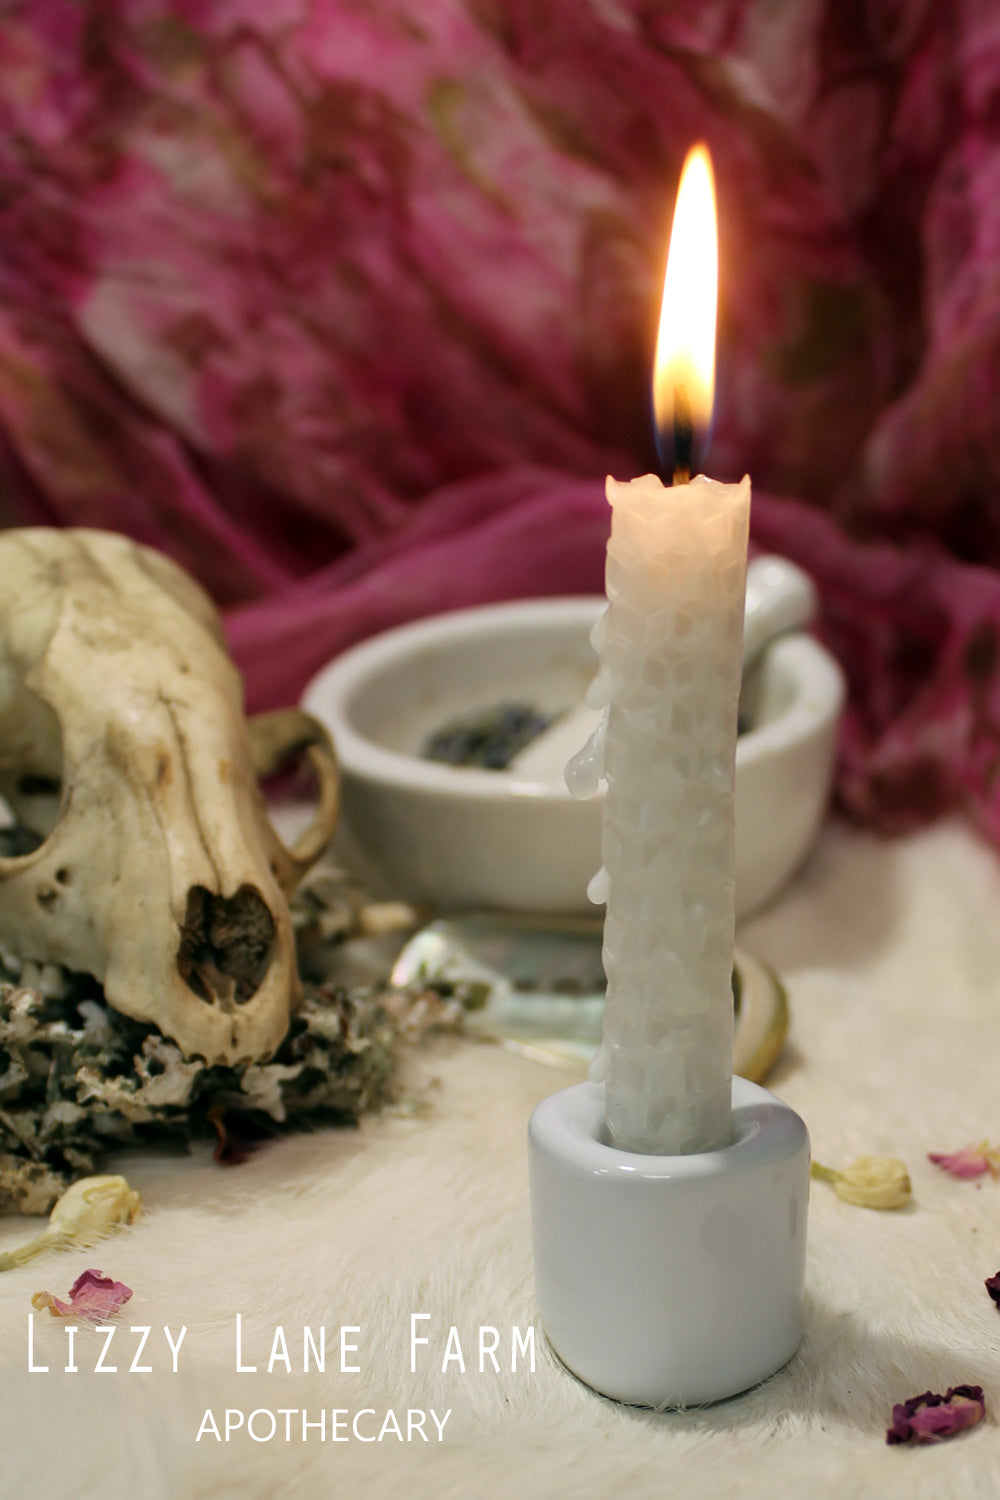 Hand-rolled Beeswax Ritual Candle Set